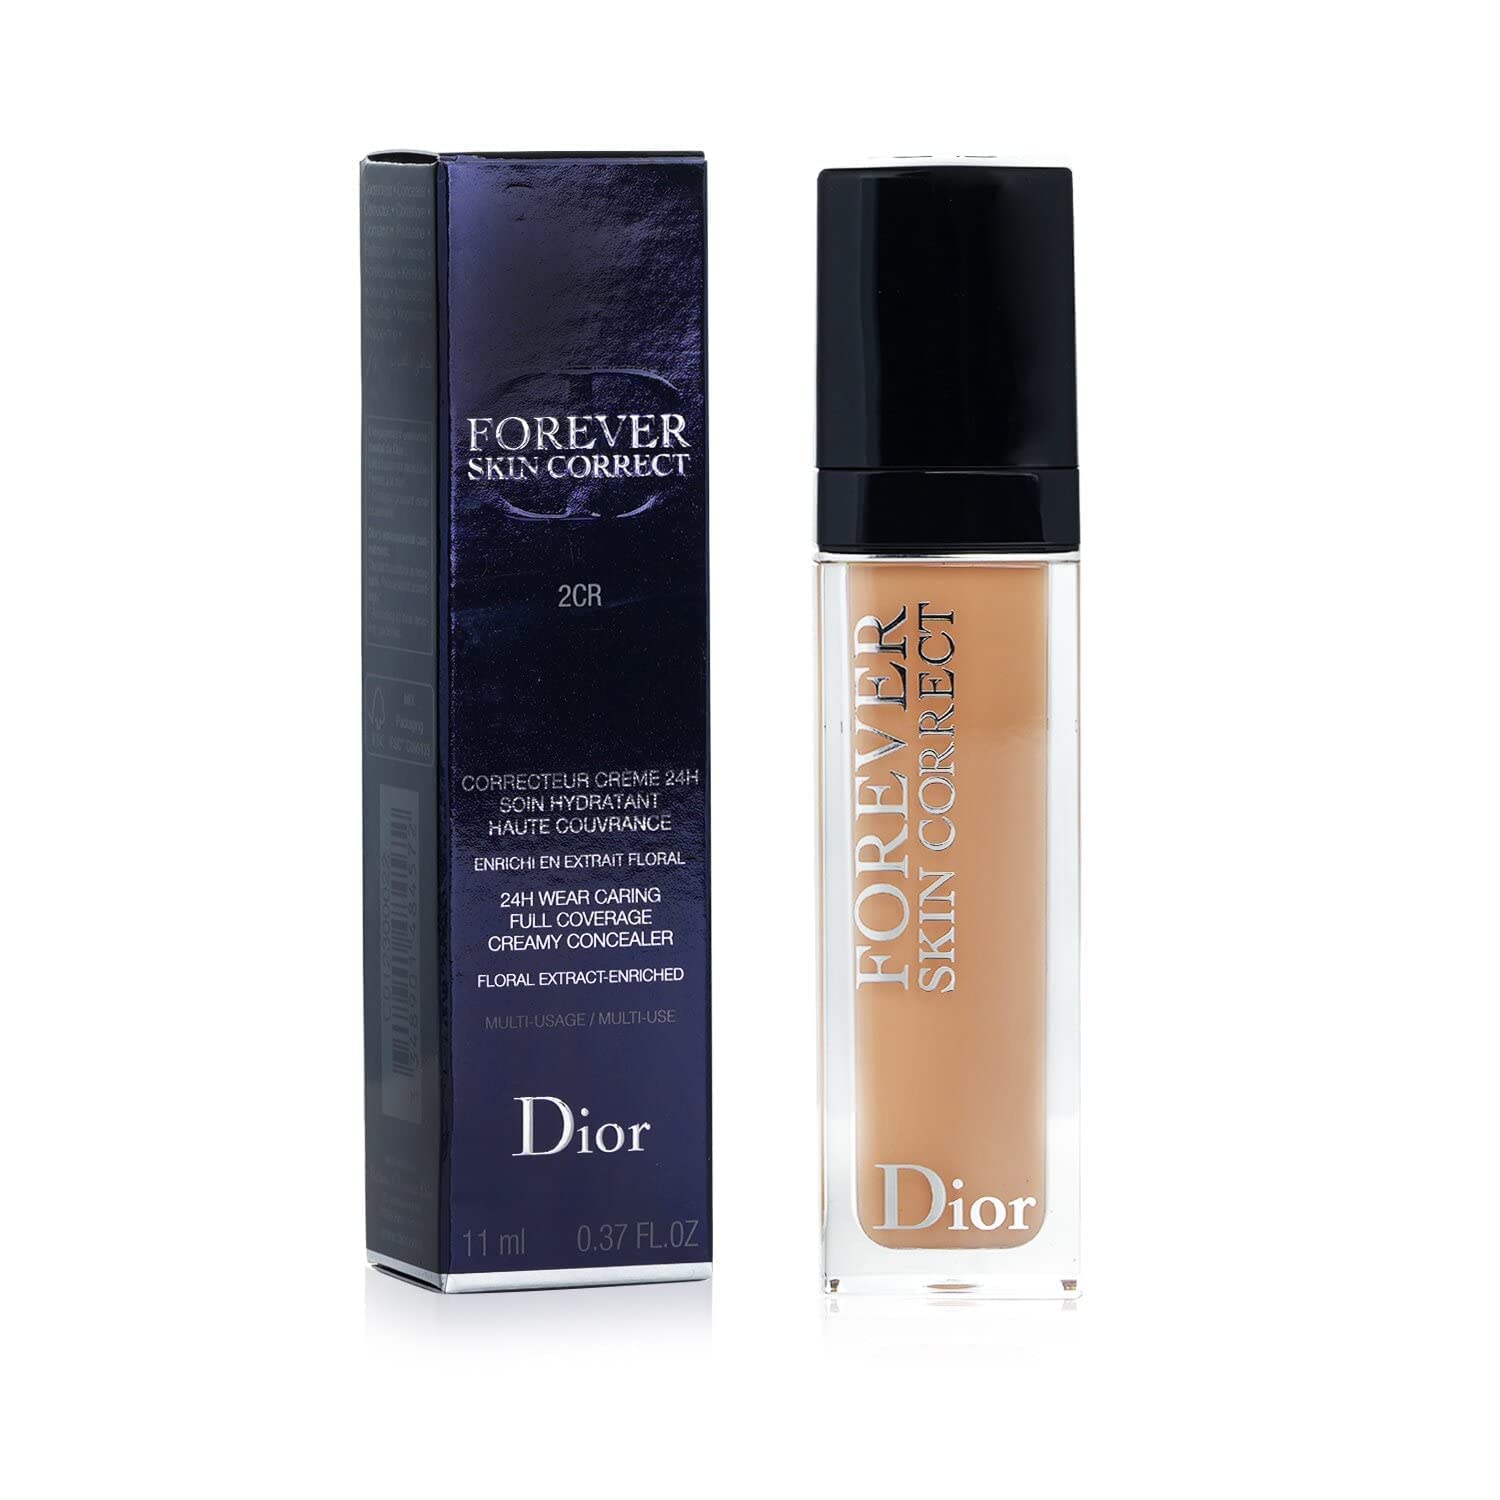 Dior Diorskin Forever Undercover Concealer Review  Swatches  Musings of a  Muse